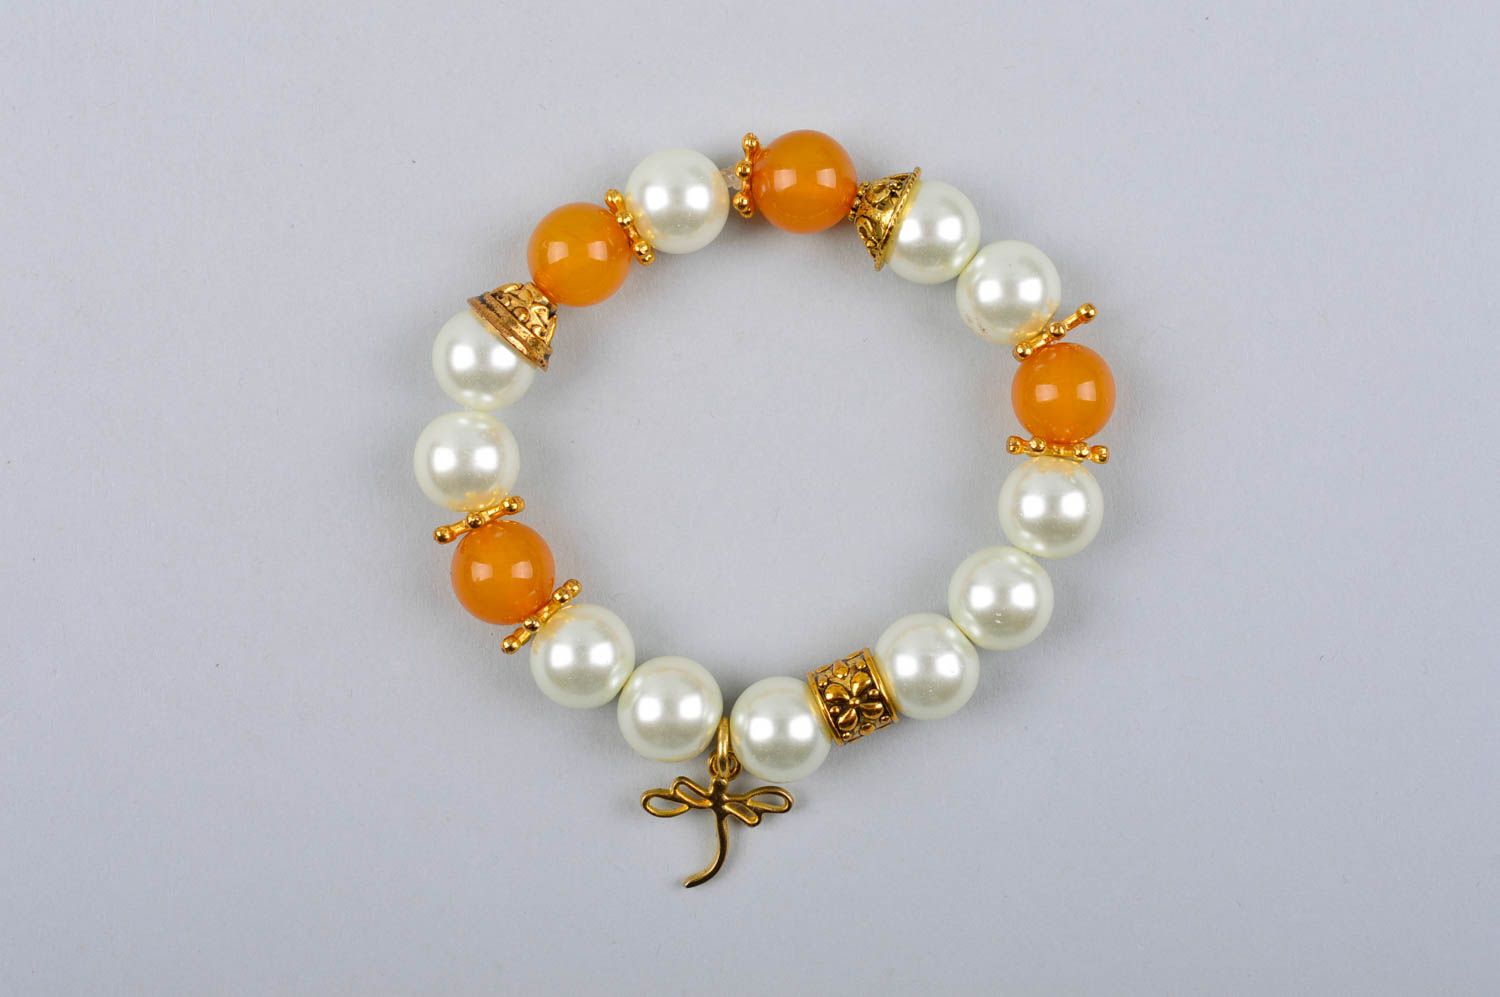 Handcrafted bracelet amber and white beads fashion designer wrist accessory photo 2